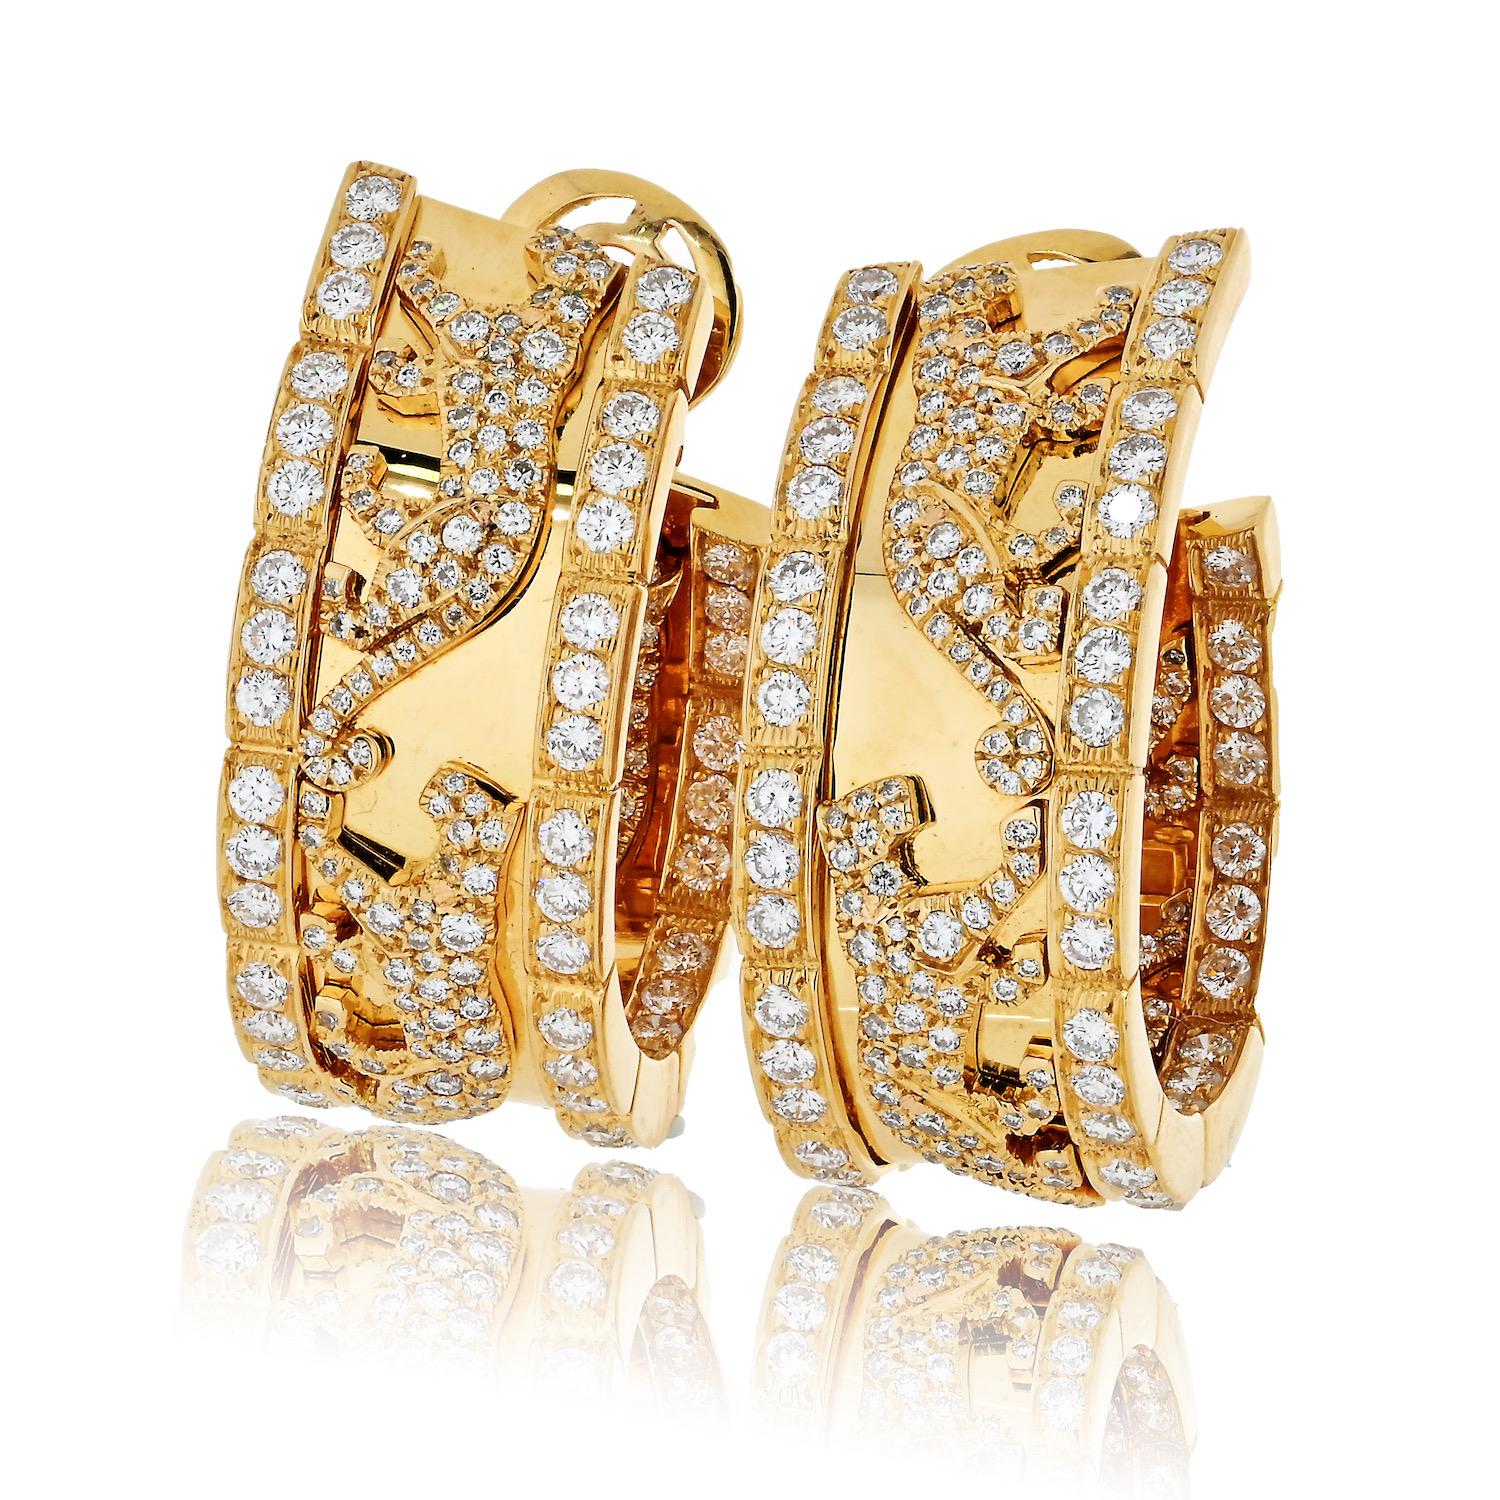 Cartier Vintage “Panthère de Cartier” walking panther diamond hoop earrings.

Indulge in the timeless allure of these exquisite Cartier 18k Yellow Gold Walking Panthère Diamond Hoop Earrings, a true embodiment of sophistication and craftsmanship.